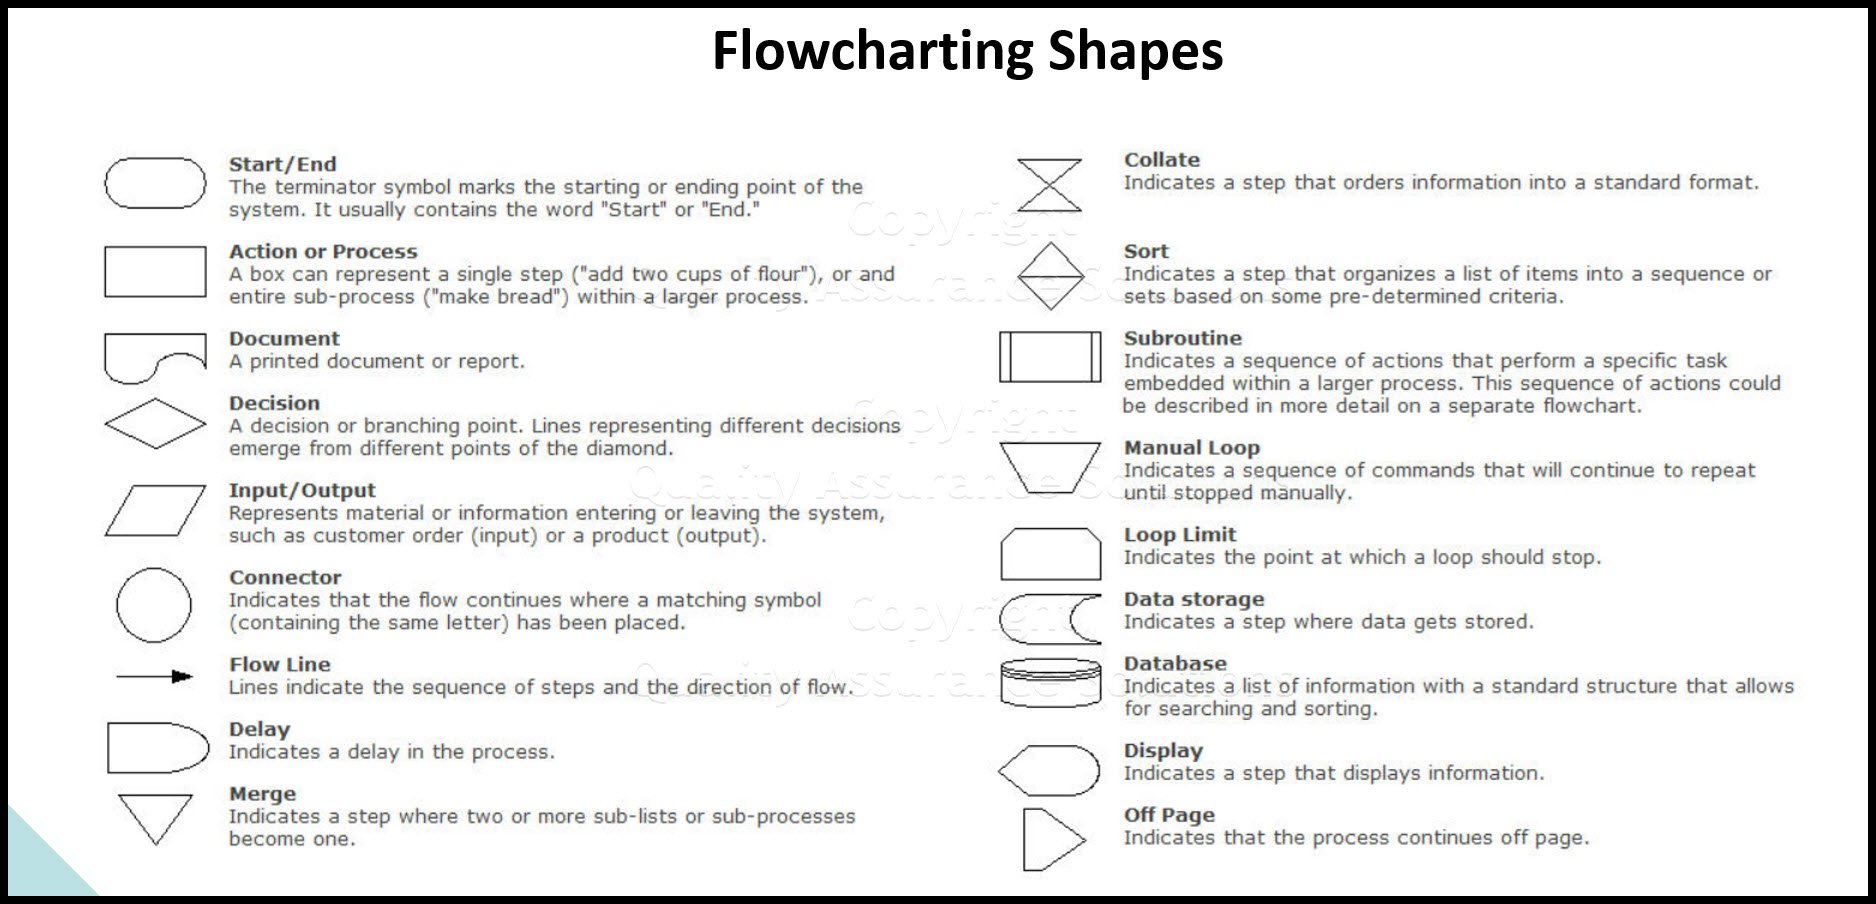 This page provides examples of flowchart shapes and descriptions for the flowcharting shapes